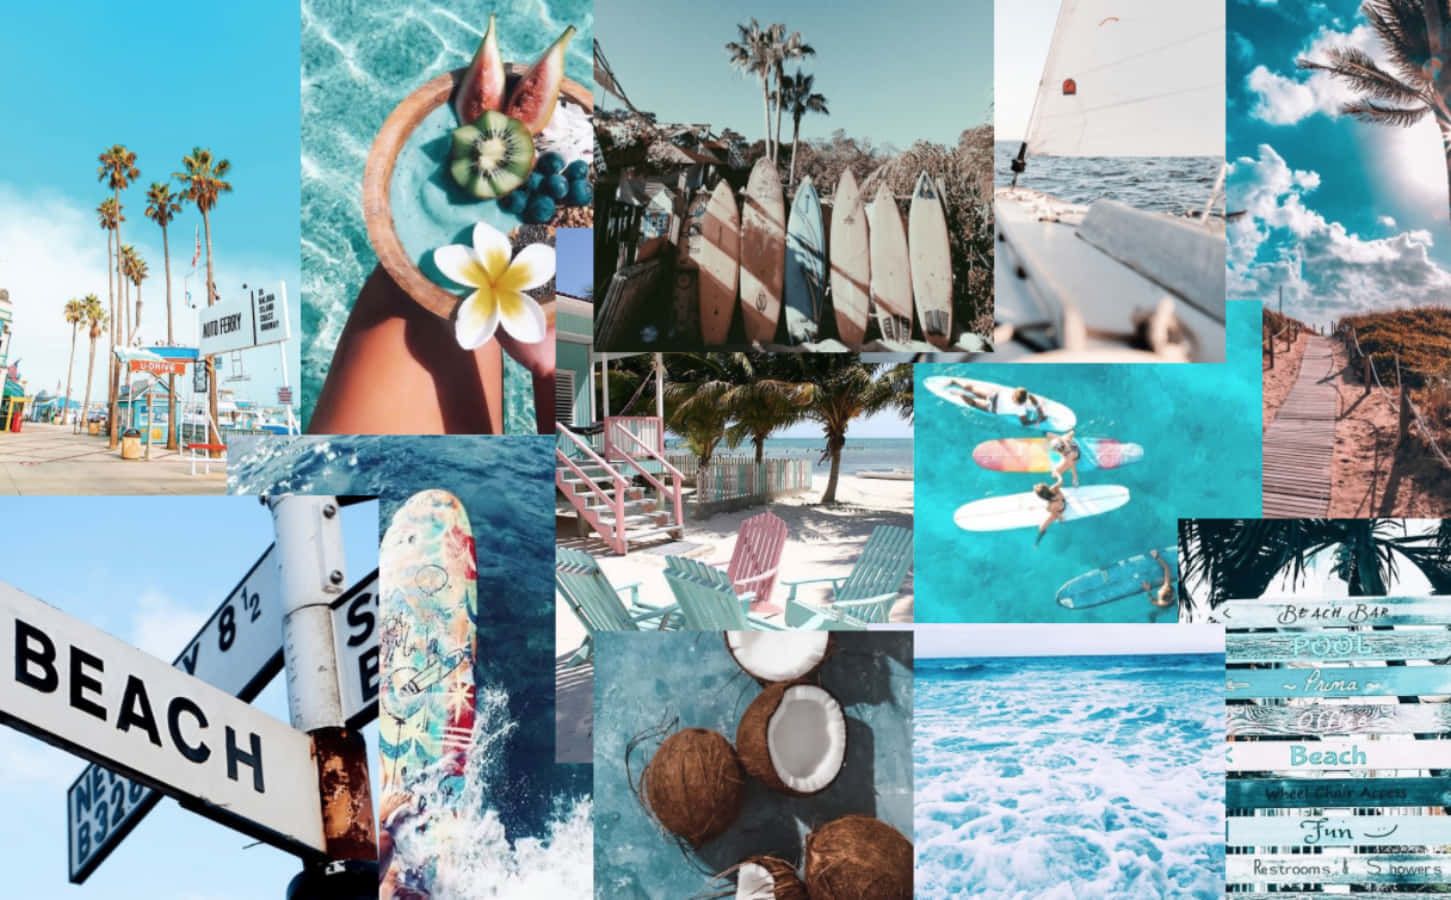 Free Collage Aesthetic Summer Laptop Wallpaper Downloads, Collage Aesthetic Summer Laptop Wallpaper for FREE